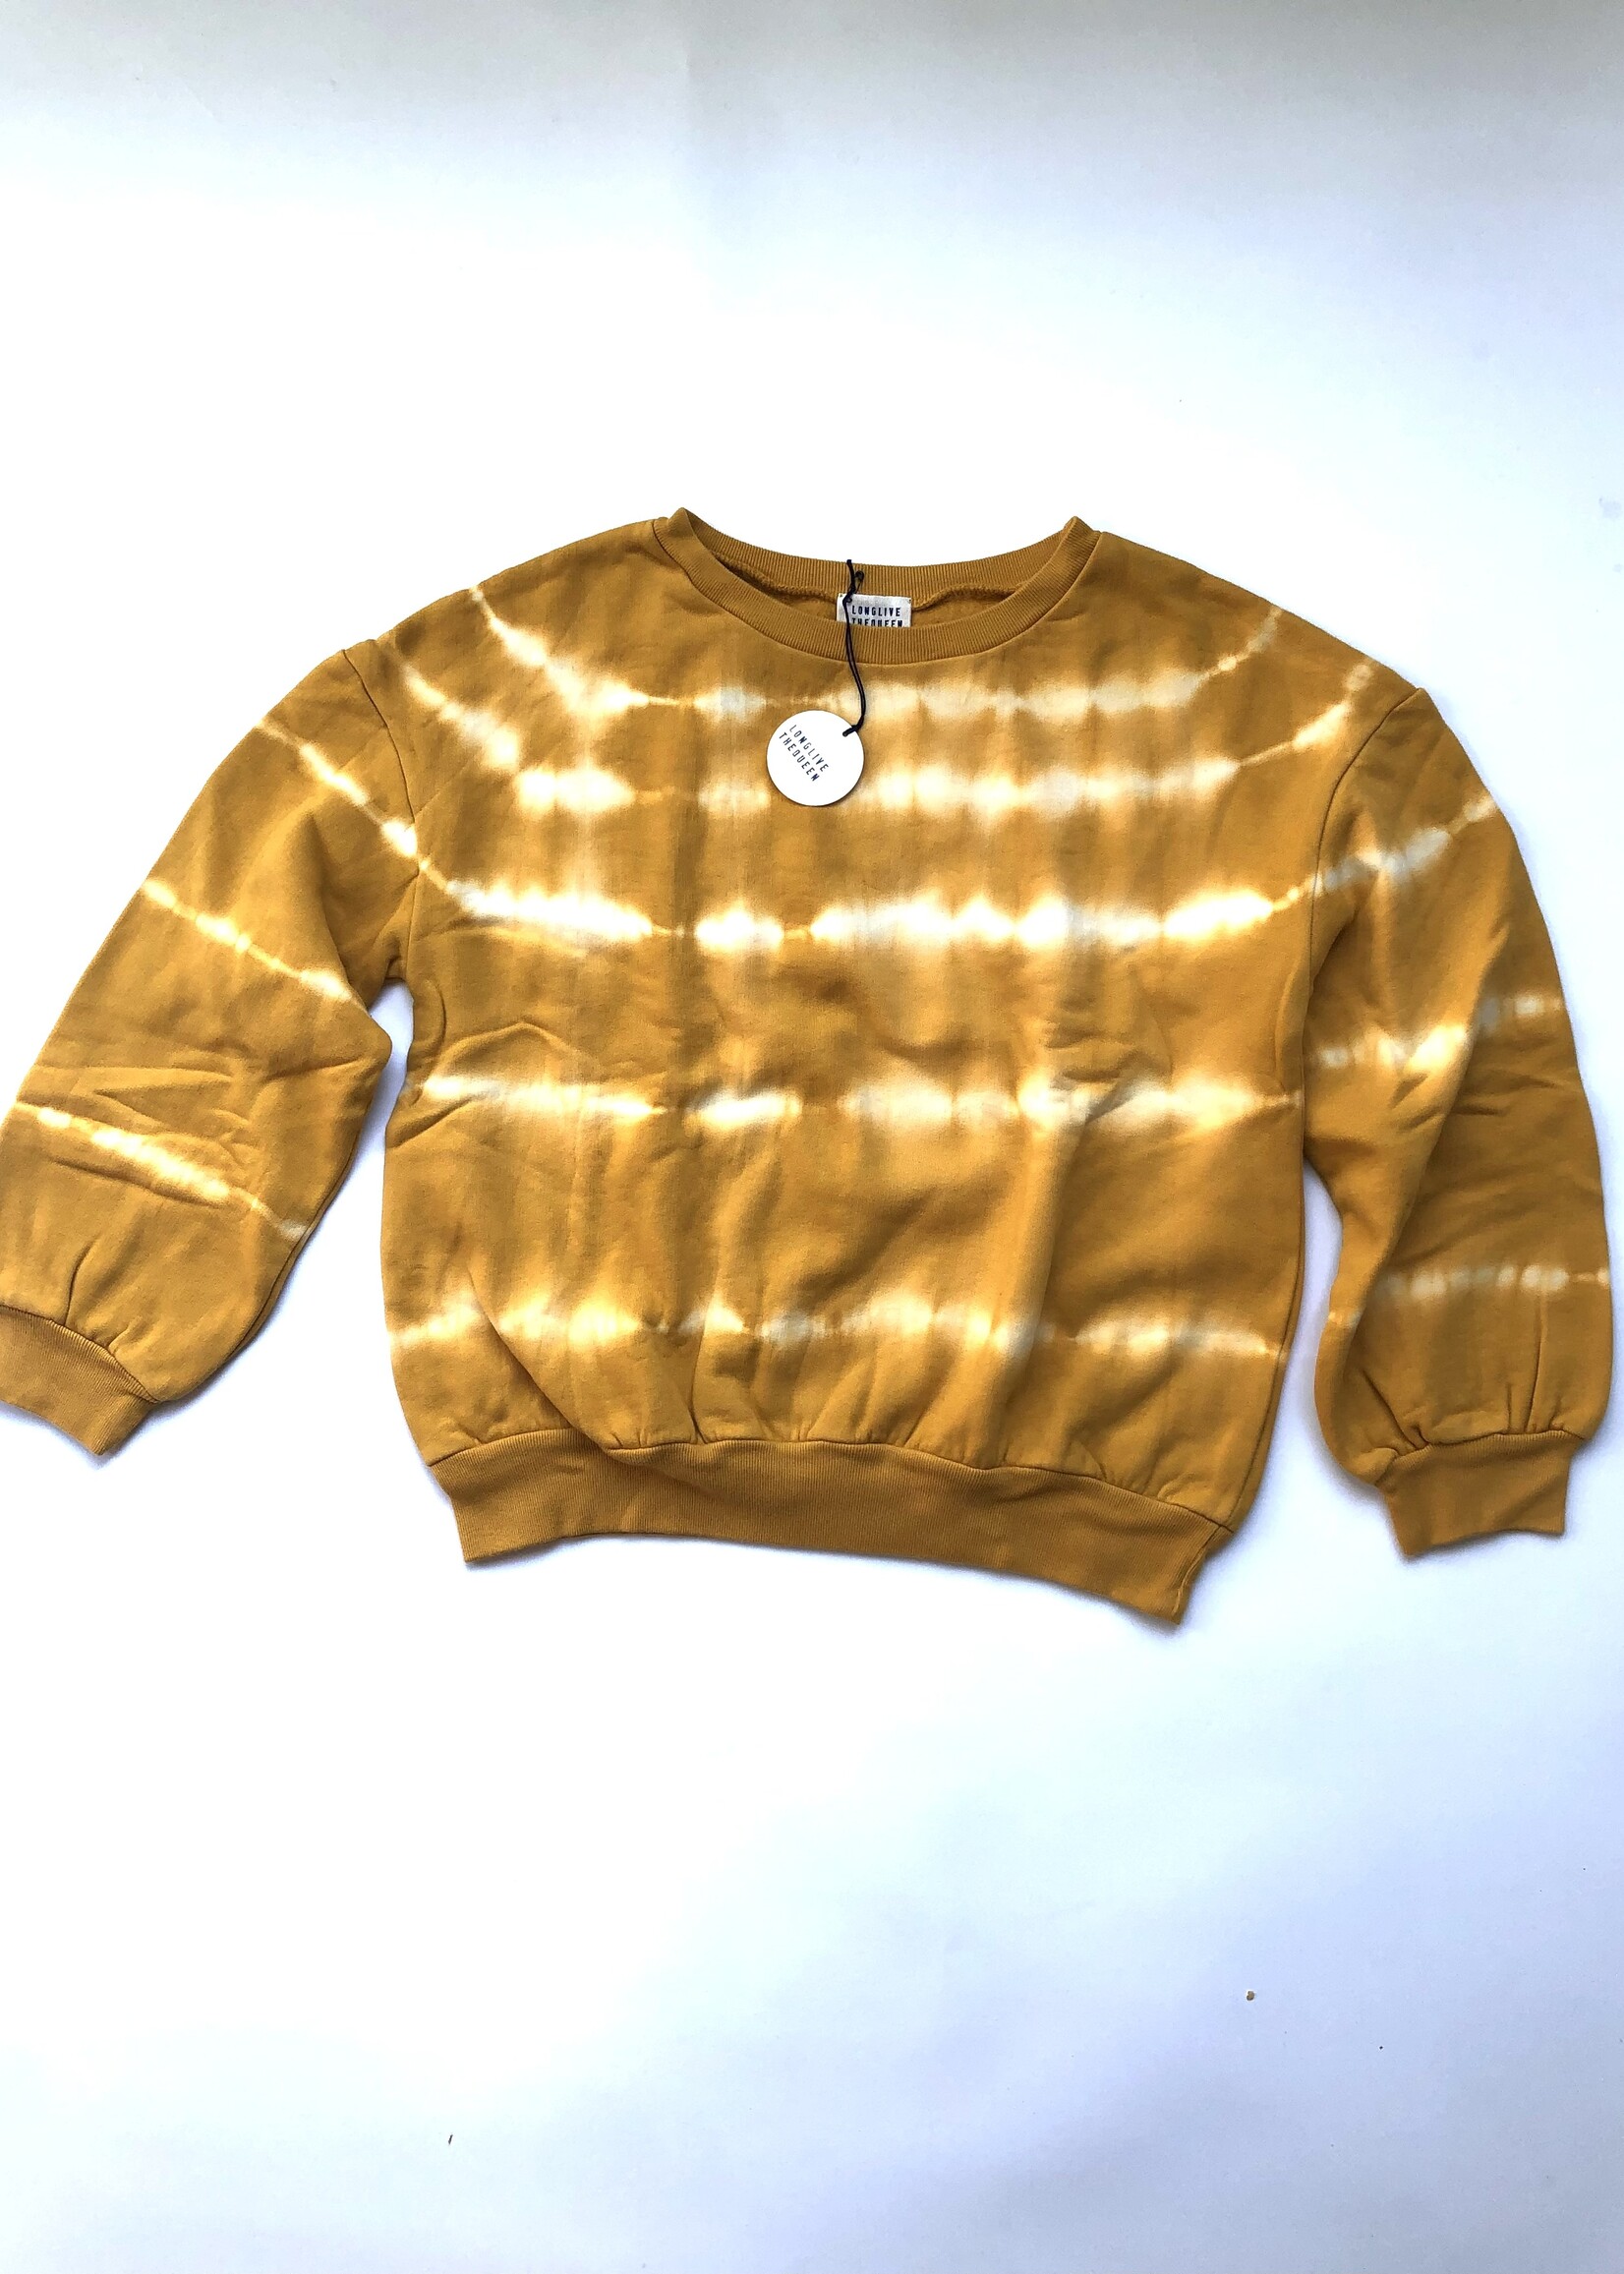 Long Live The Queen Yellow Tie dye sweater 10-12y